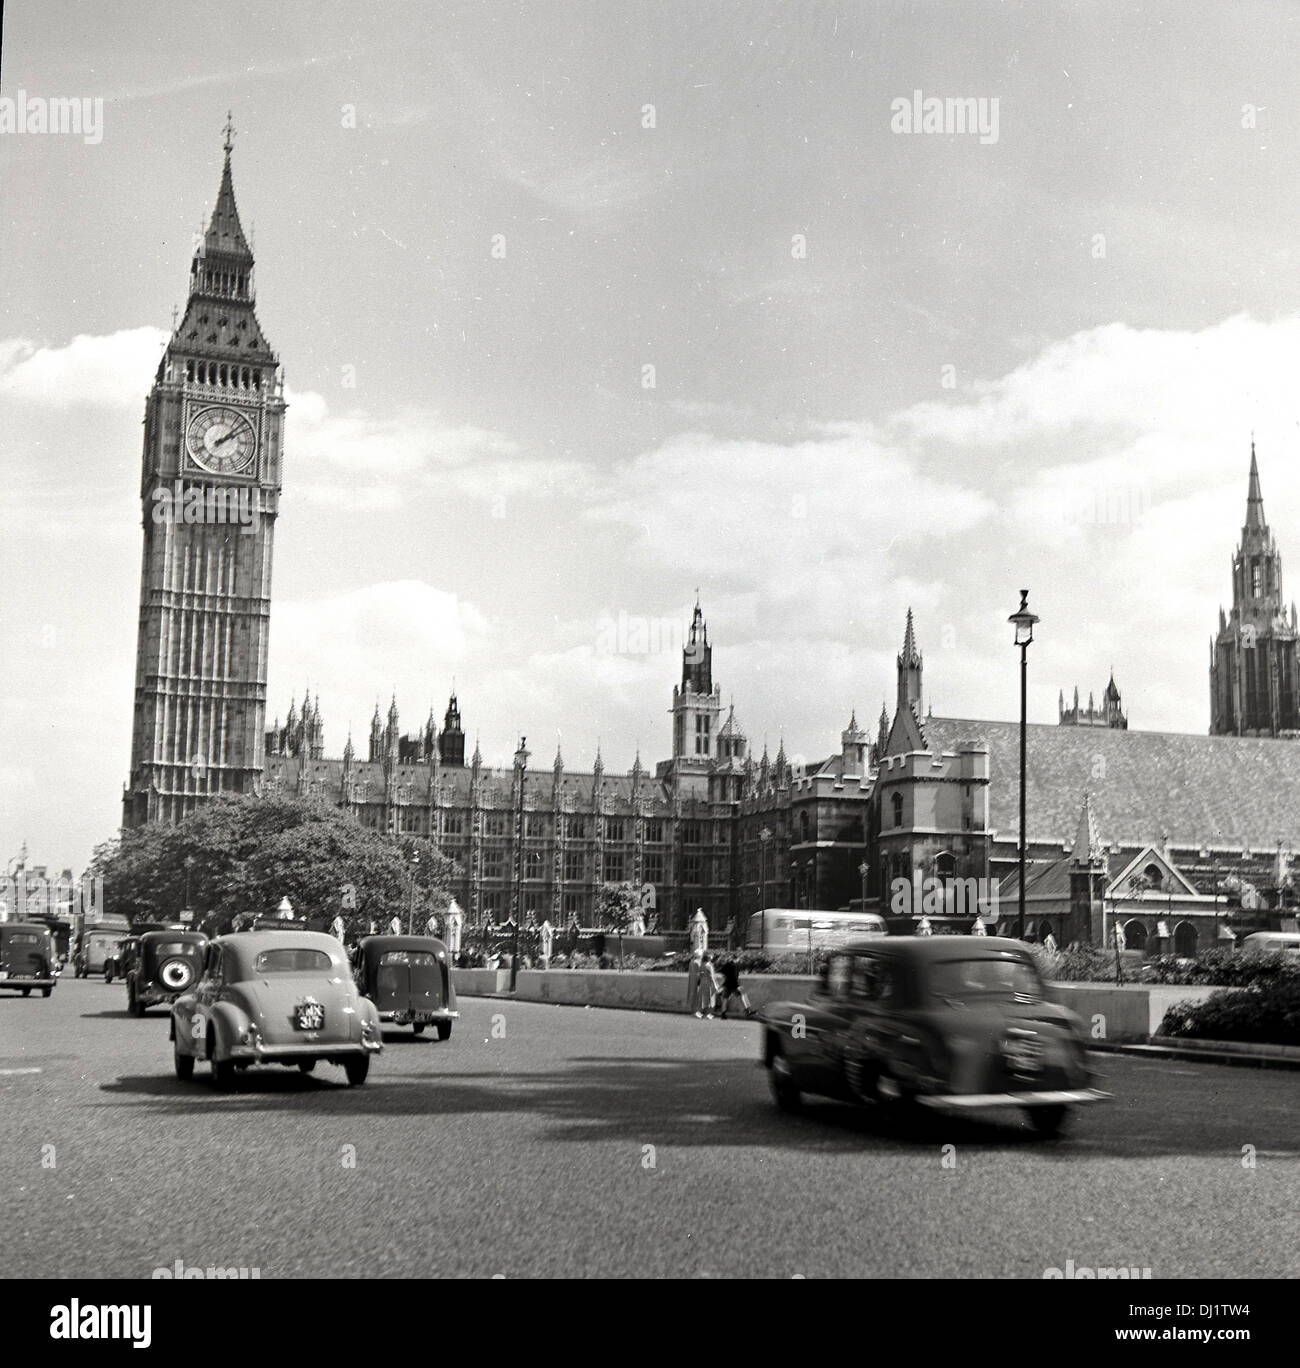 1950s and an historical picture showing Big Ben, the clock tower next to the British Houses of Parliament, London, England. Stock Photo